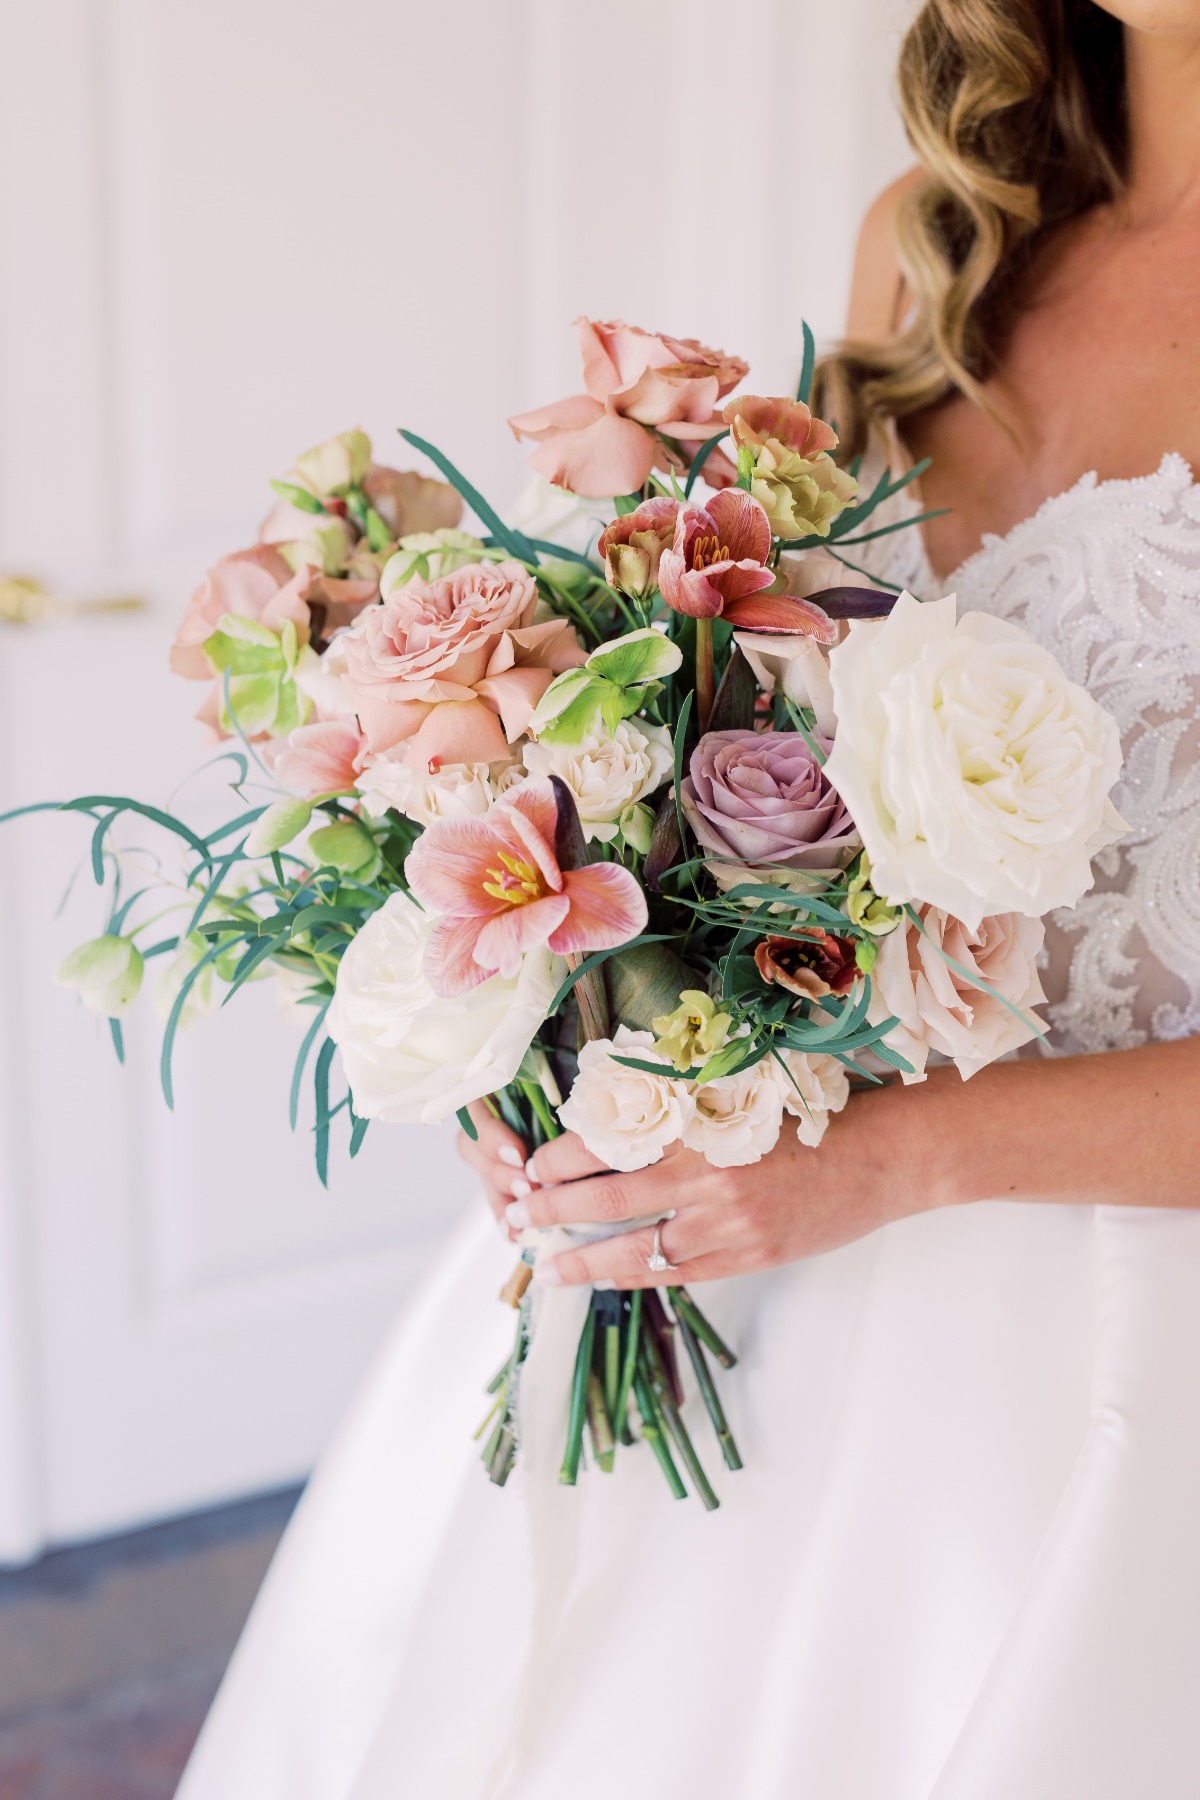 picture perfect bouquet